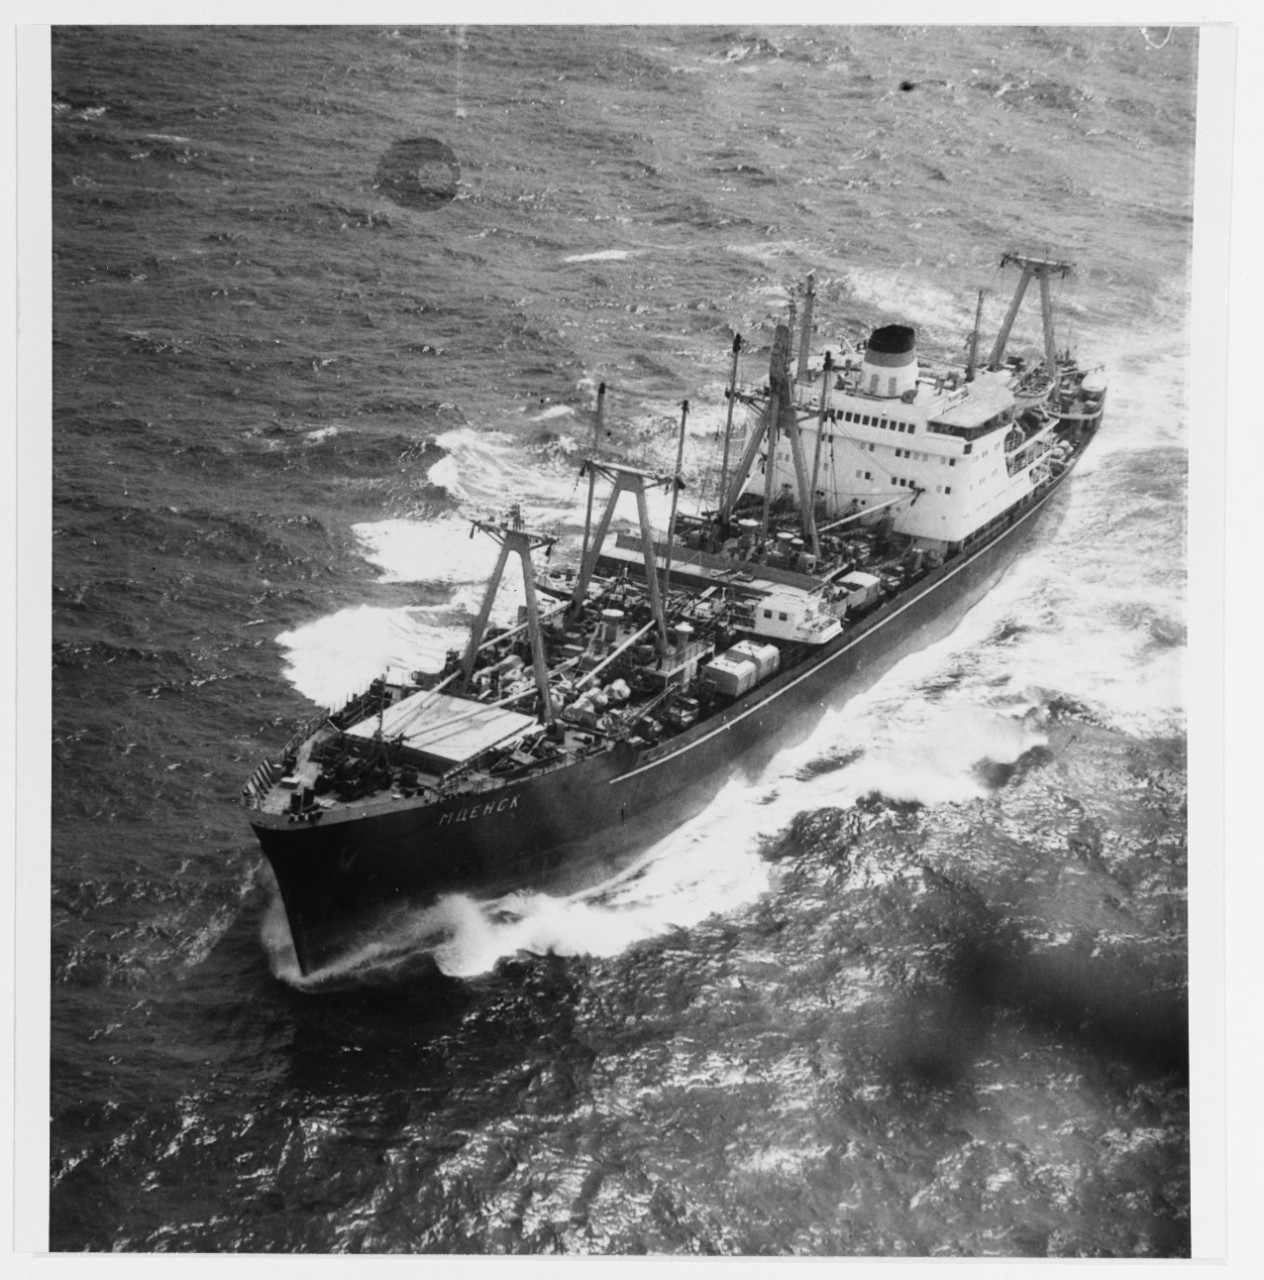 Frank E. Evans helps track ships such as Soviet freighter Mtsensk, seen here en route to Haiphong to supply the North Vietnamese, 7 November 1967. An aircraft flying from Kearsarge photographs the ship, her deck piled high with contraband cargo including another vessel spotted somewhat precariously amidships. (U.S. Navy Photograph 1129635, National Archives and Records Administration, Still Pictures Branch, College Park, Md.)